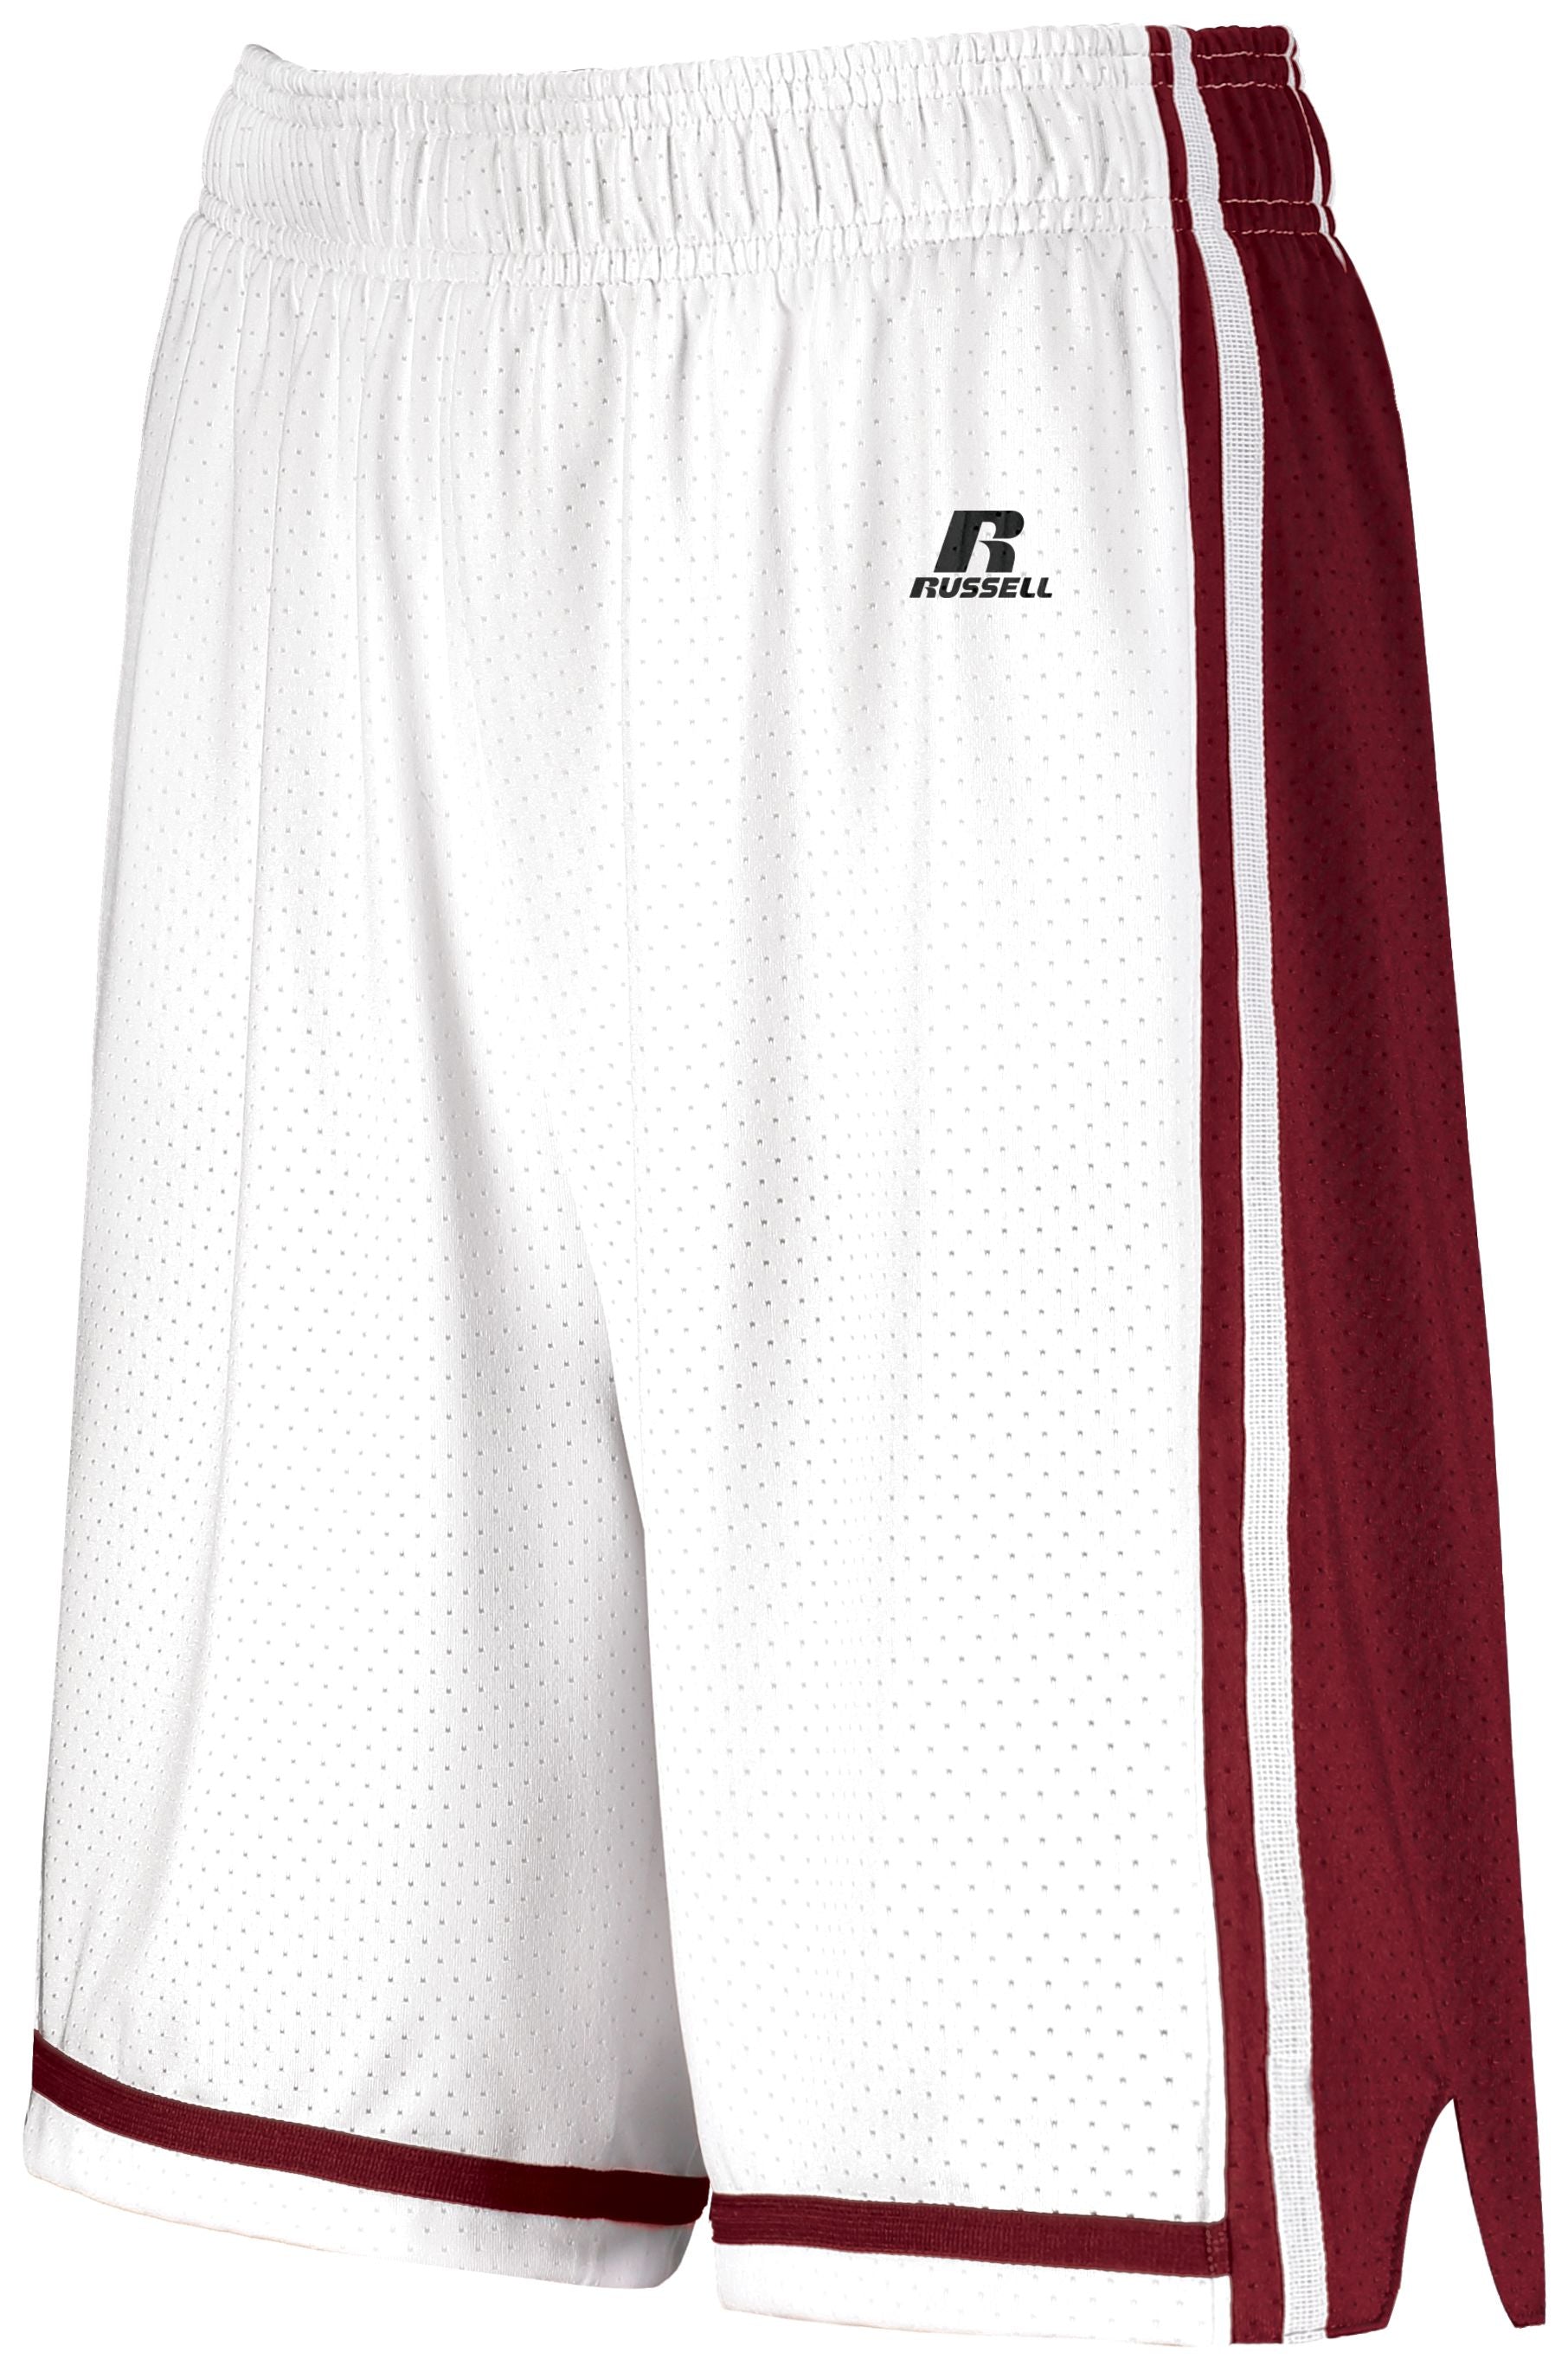 Russell Athletic Ladies Legacy Basketball Shorts in White/Cardinal  -Part of the Ladies, Ladies-Shorts, Basketball, Russell-Athletic-Products, All-Sports, All-Sports-1 product lines at KanaleyCreations.com